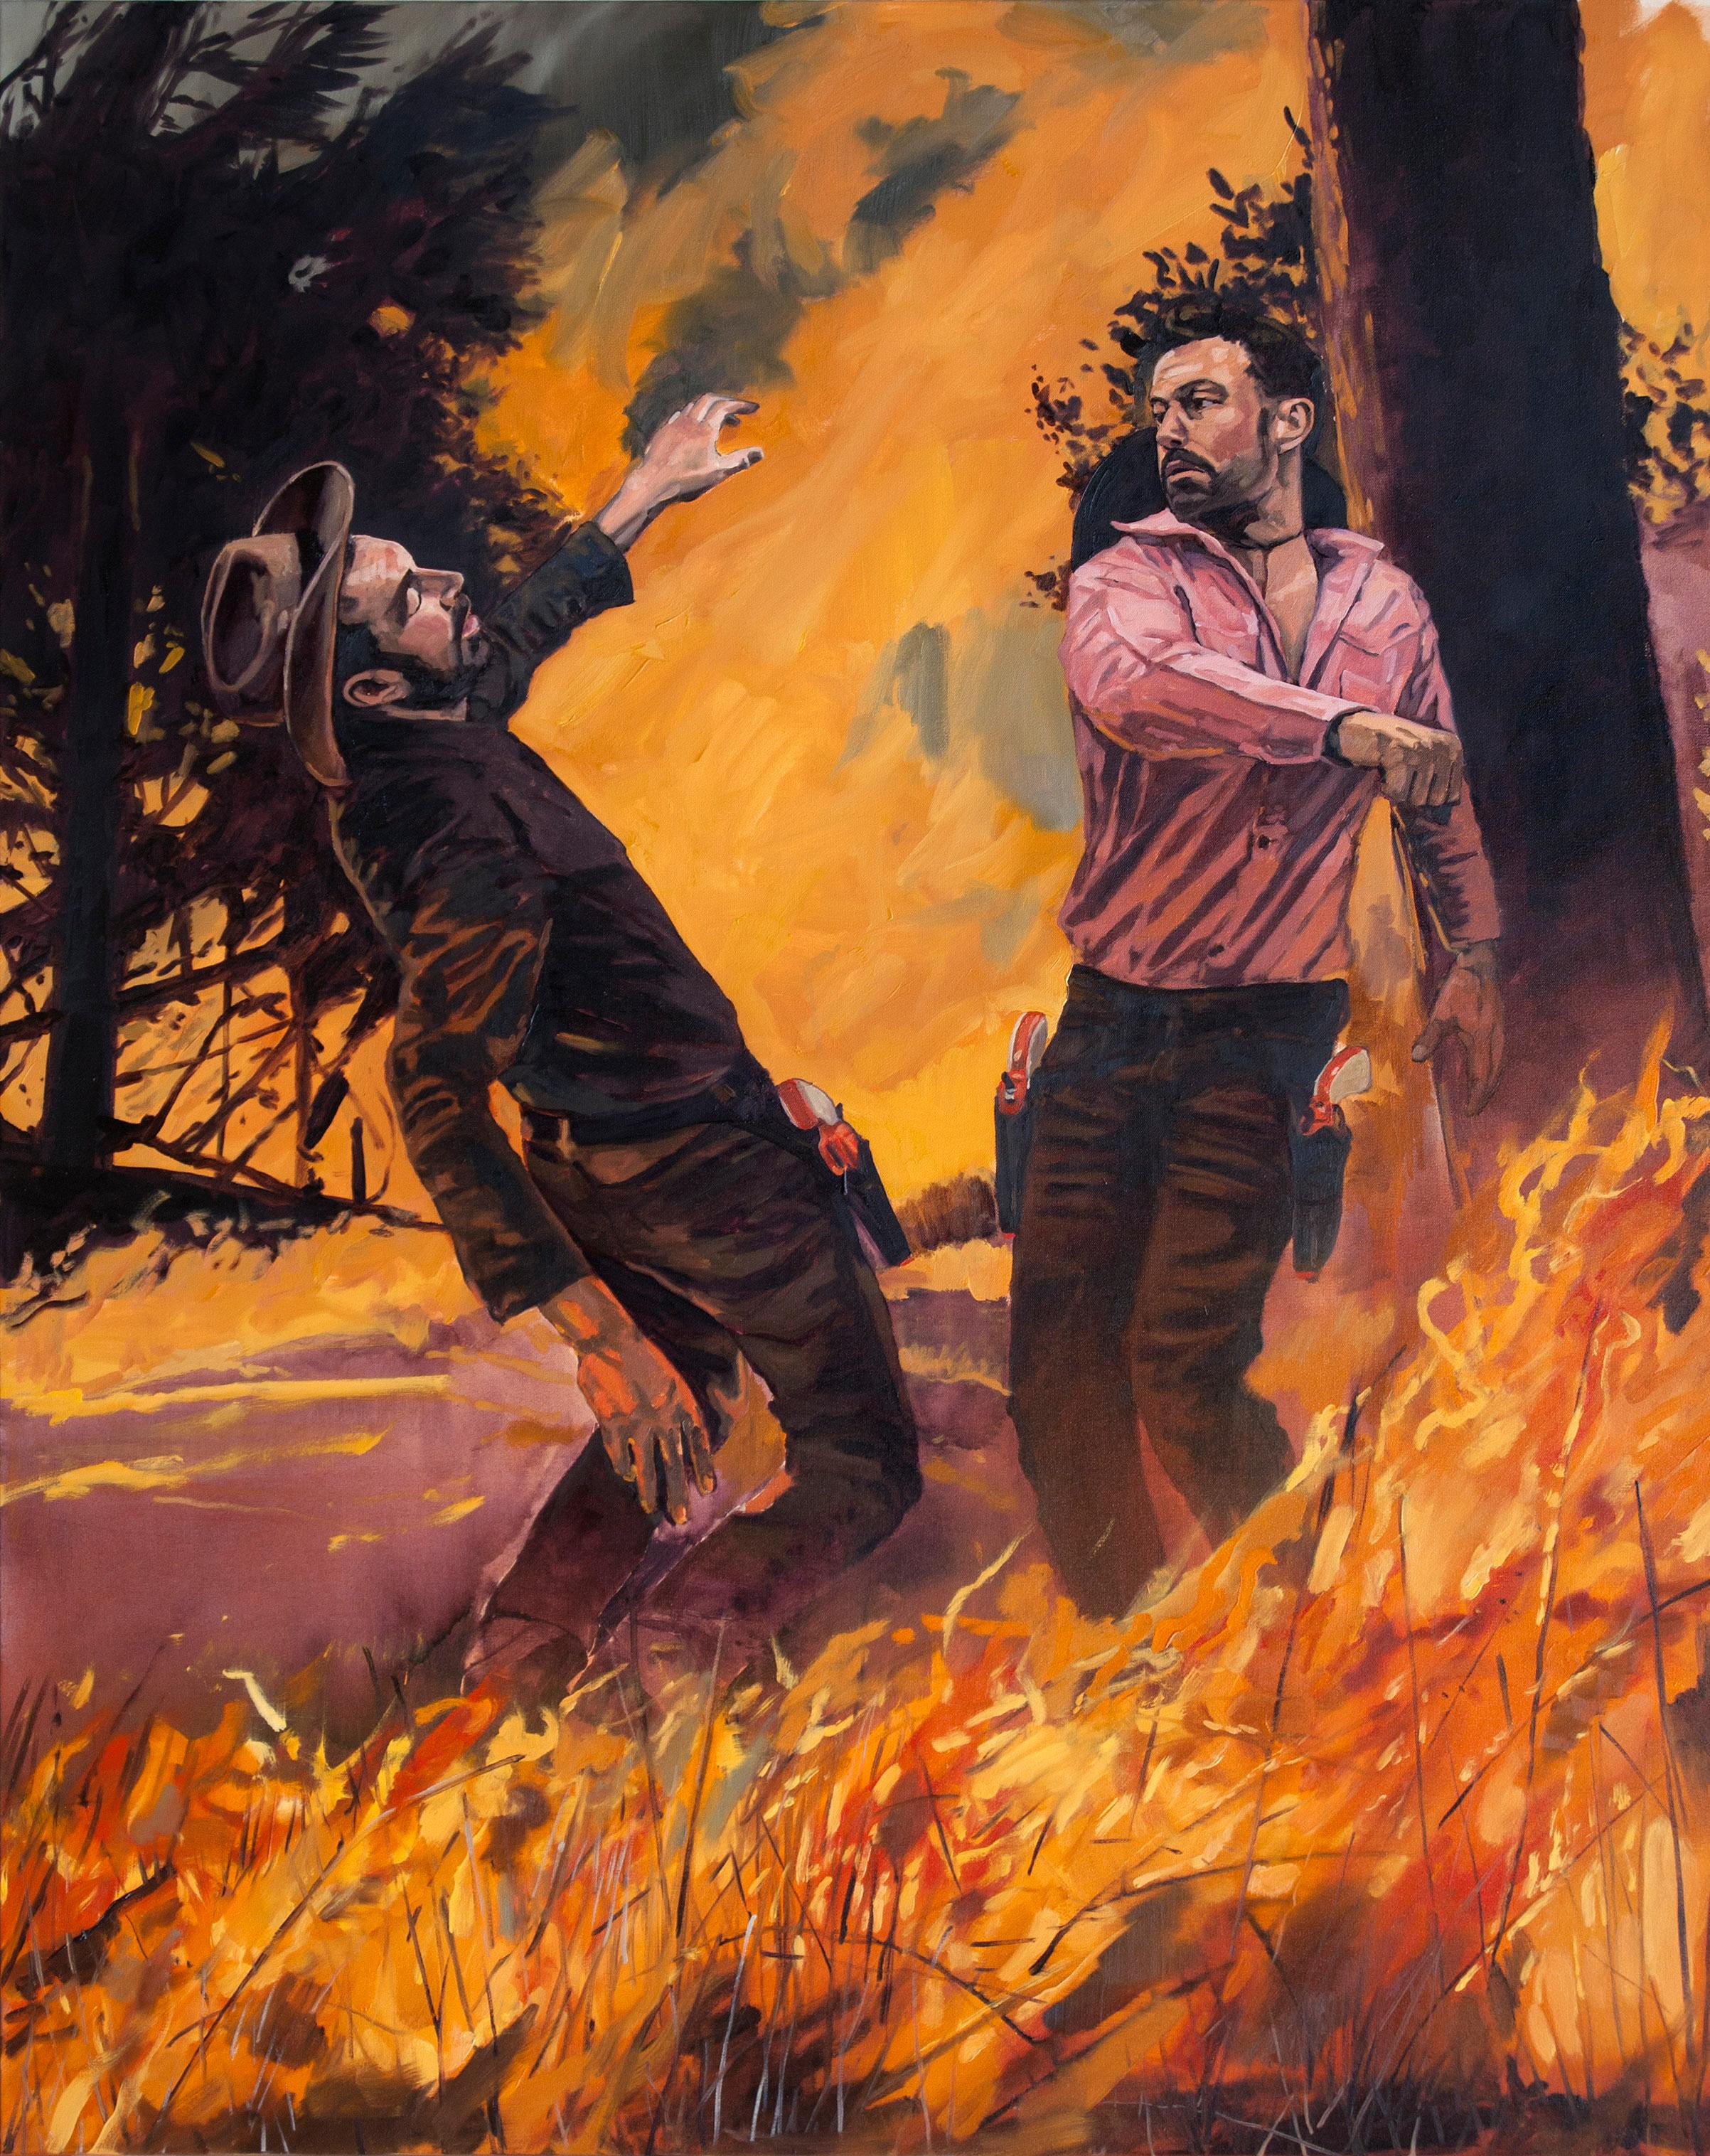 Tracy Stuckey Figurative Painting - Buck Jones in the Burning Forest